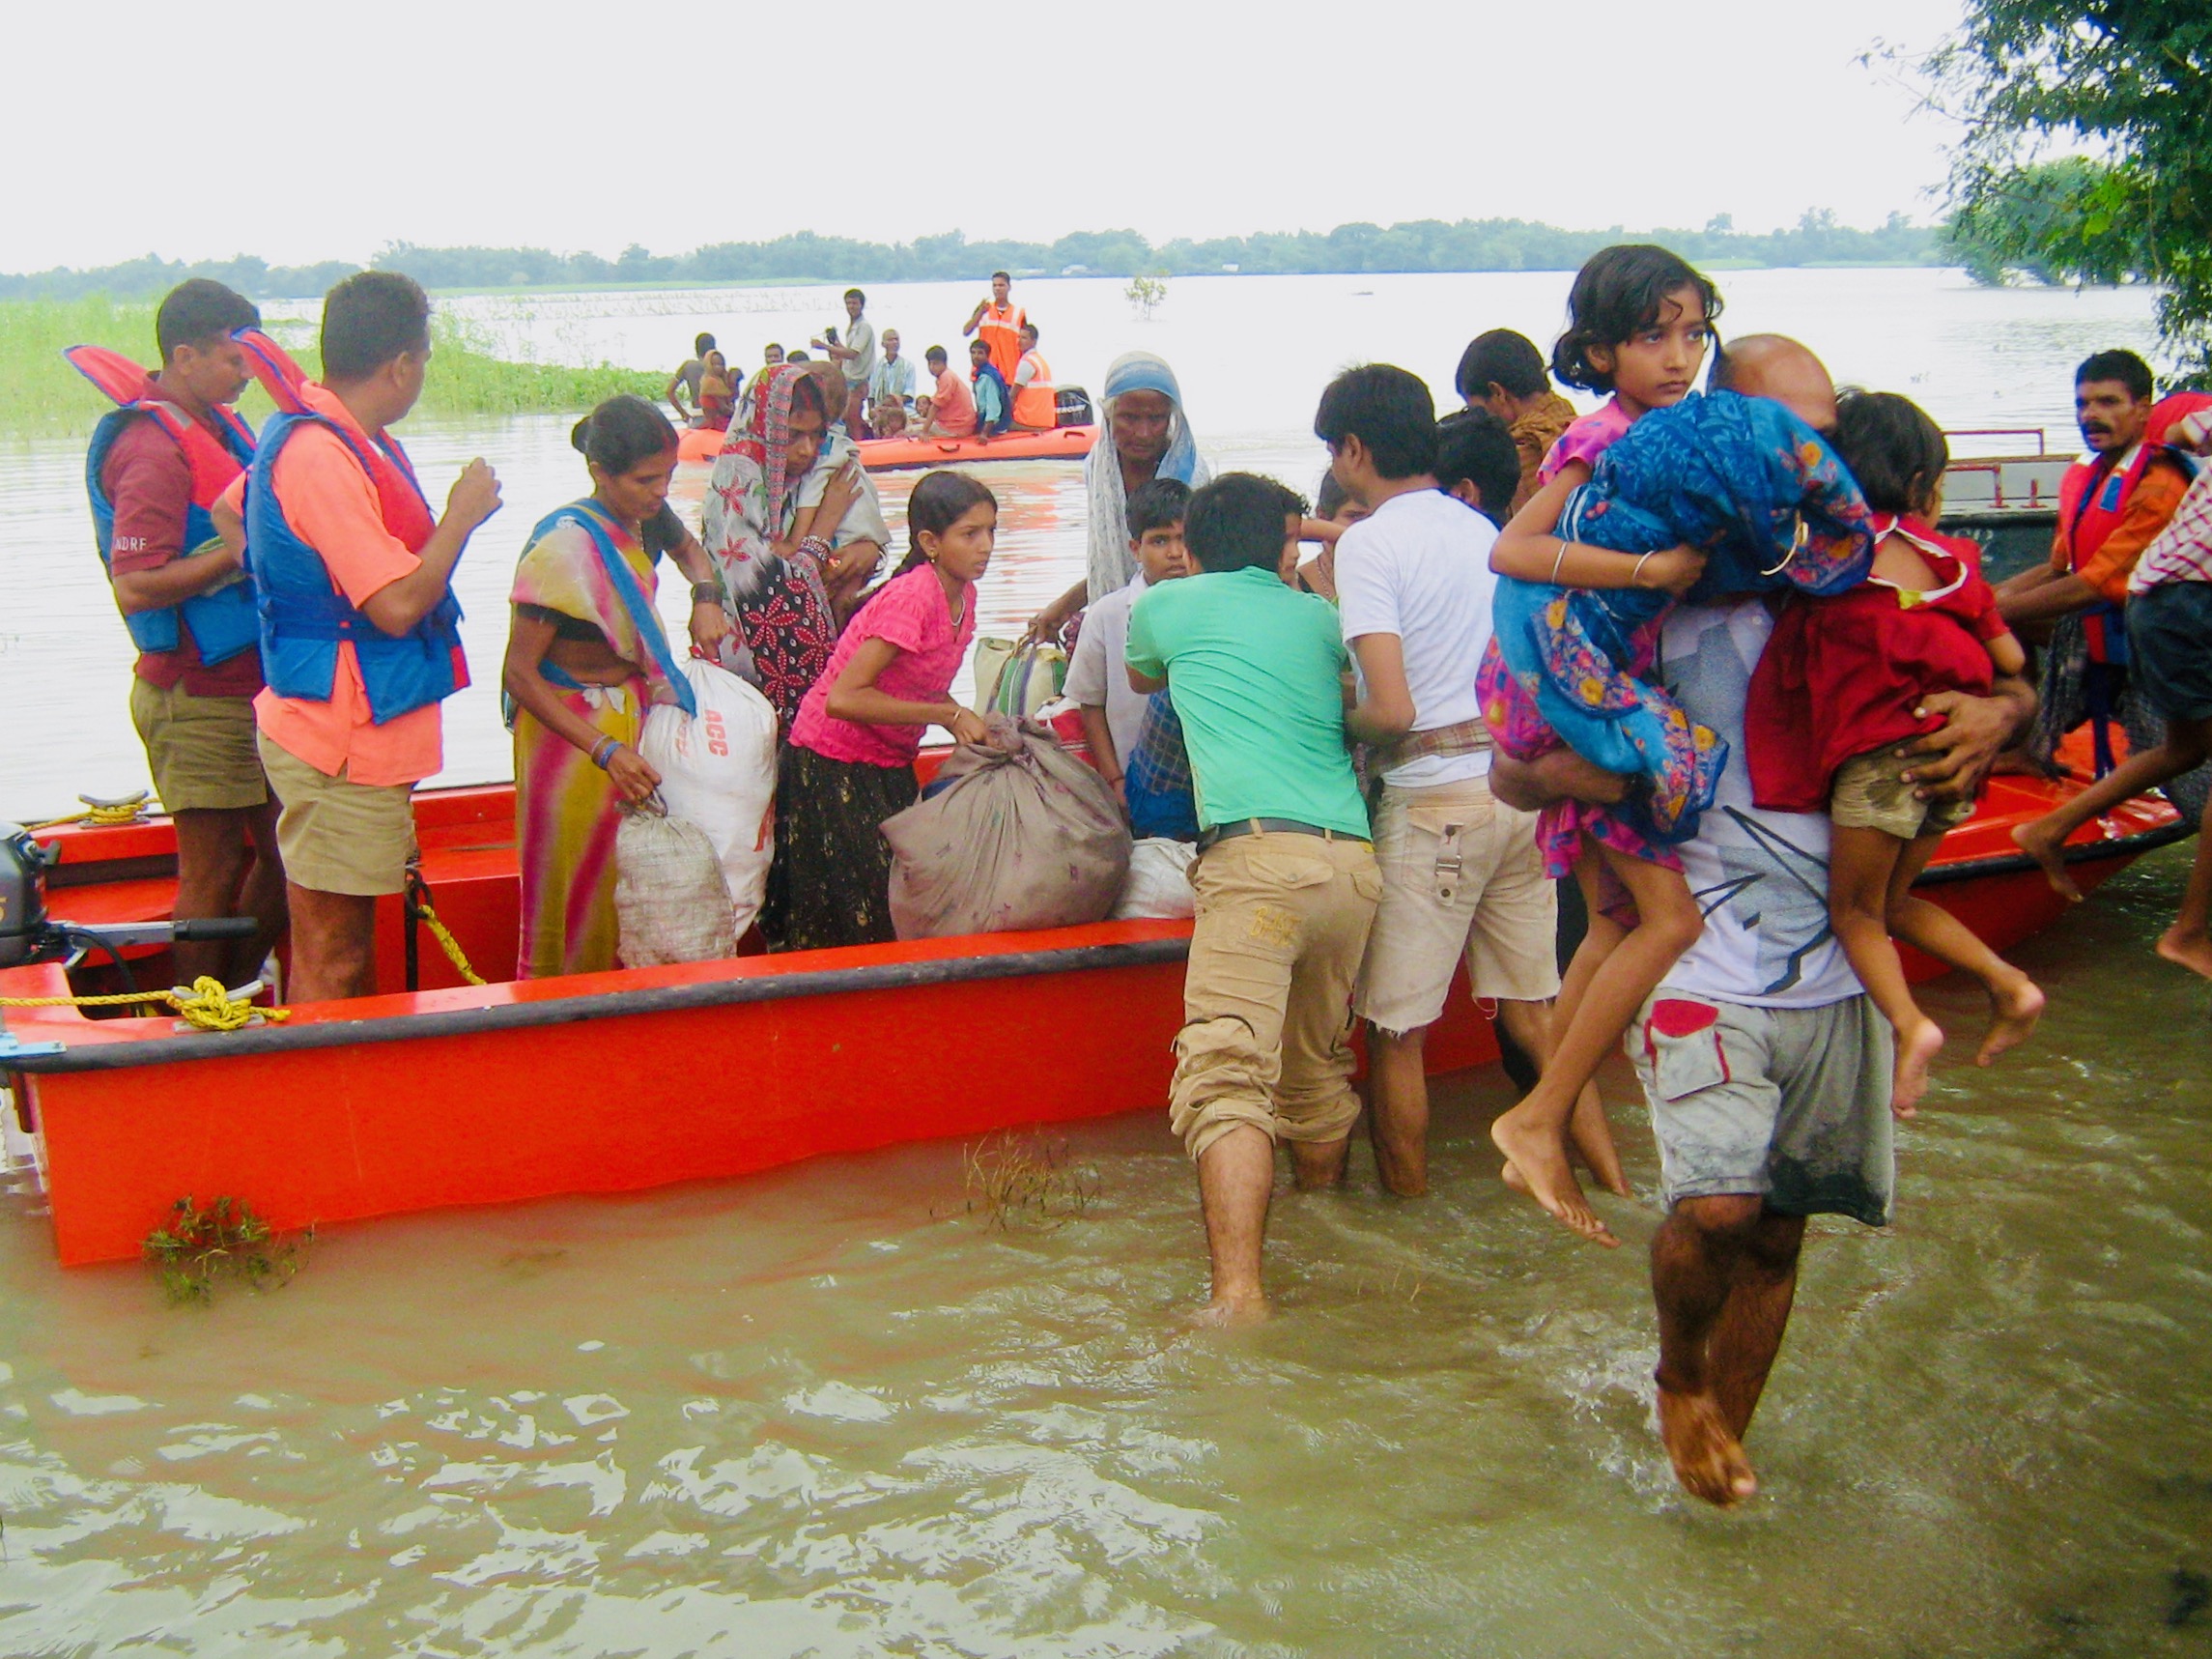 Flood victims load belongings into a boat